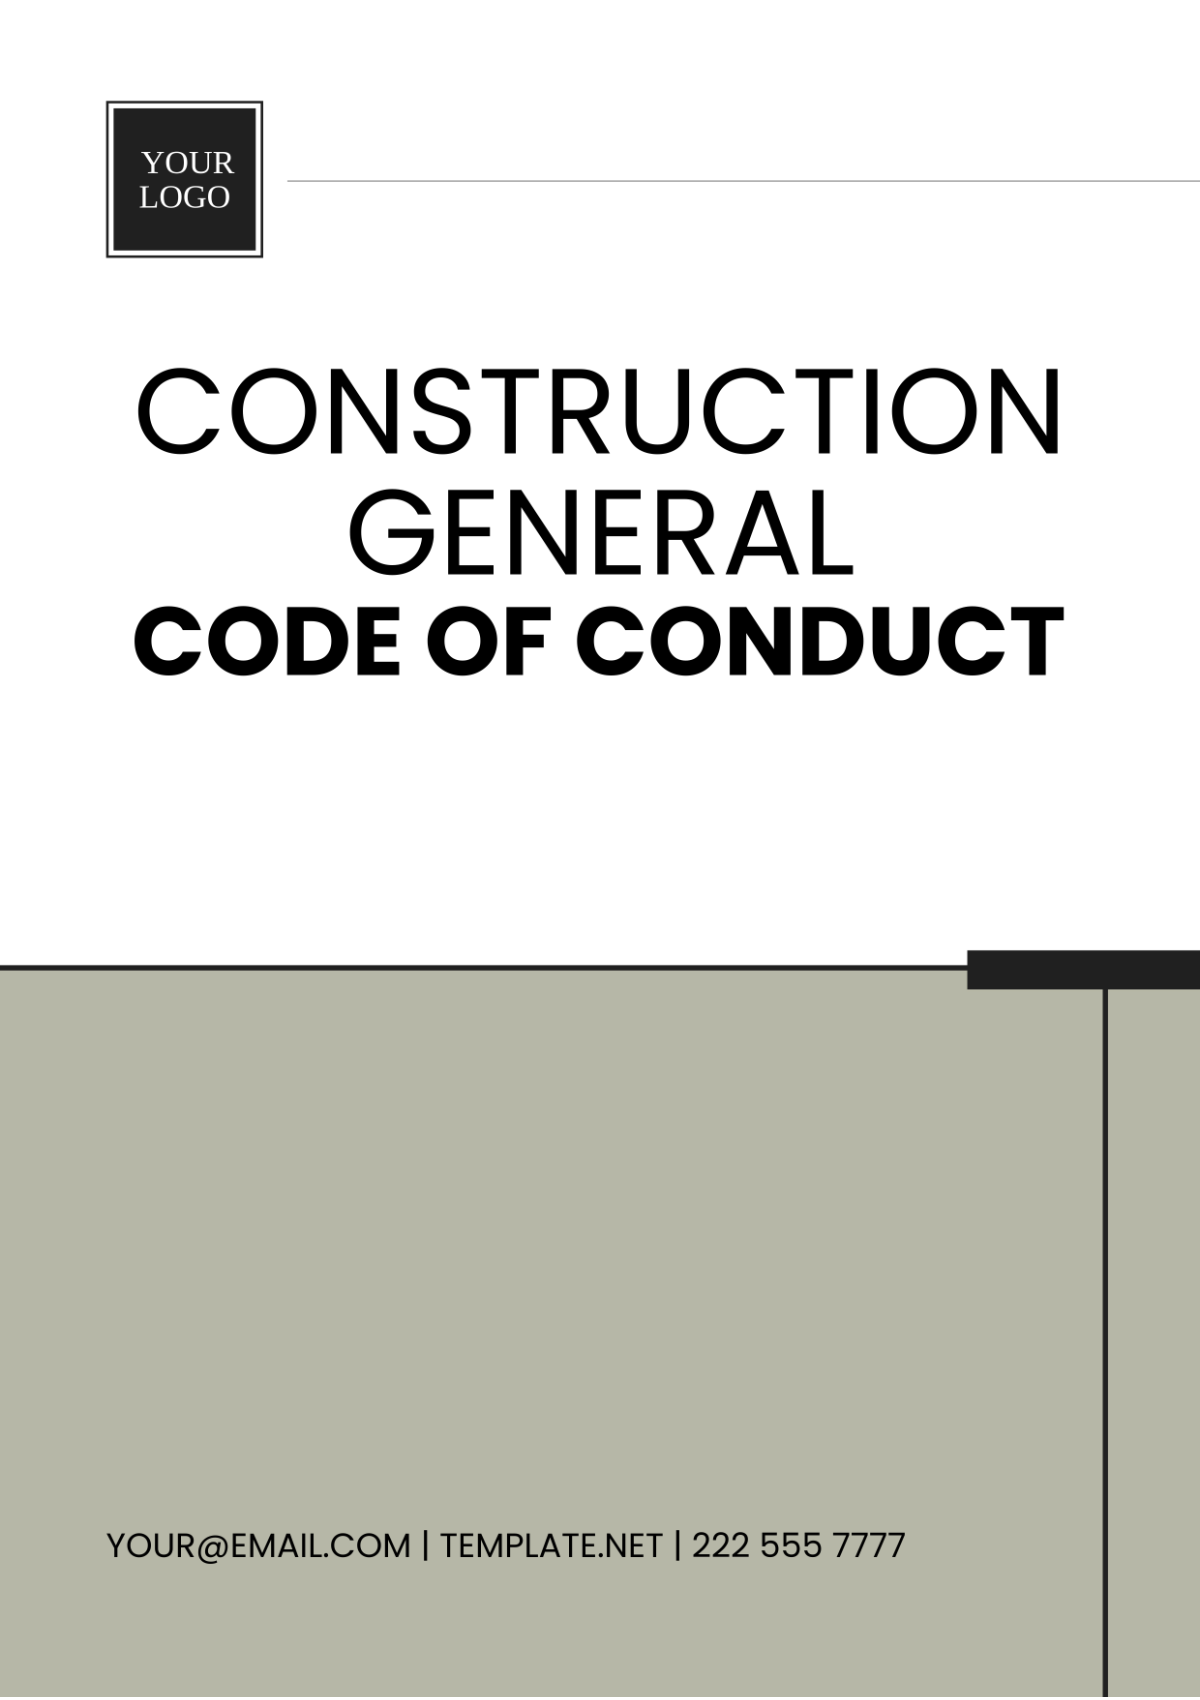 Free Construction General Code of Conduct Template